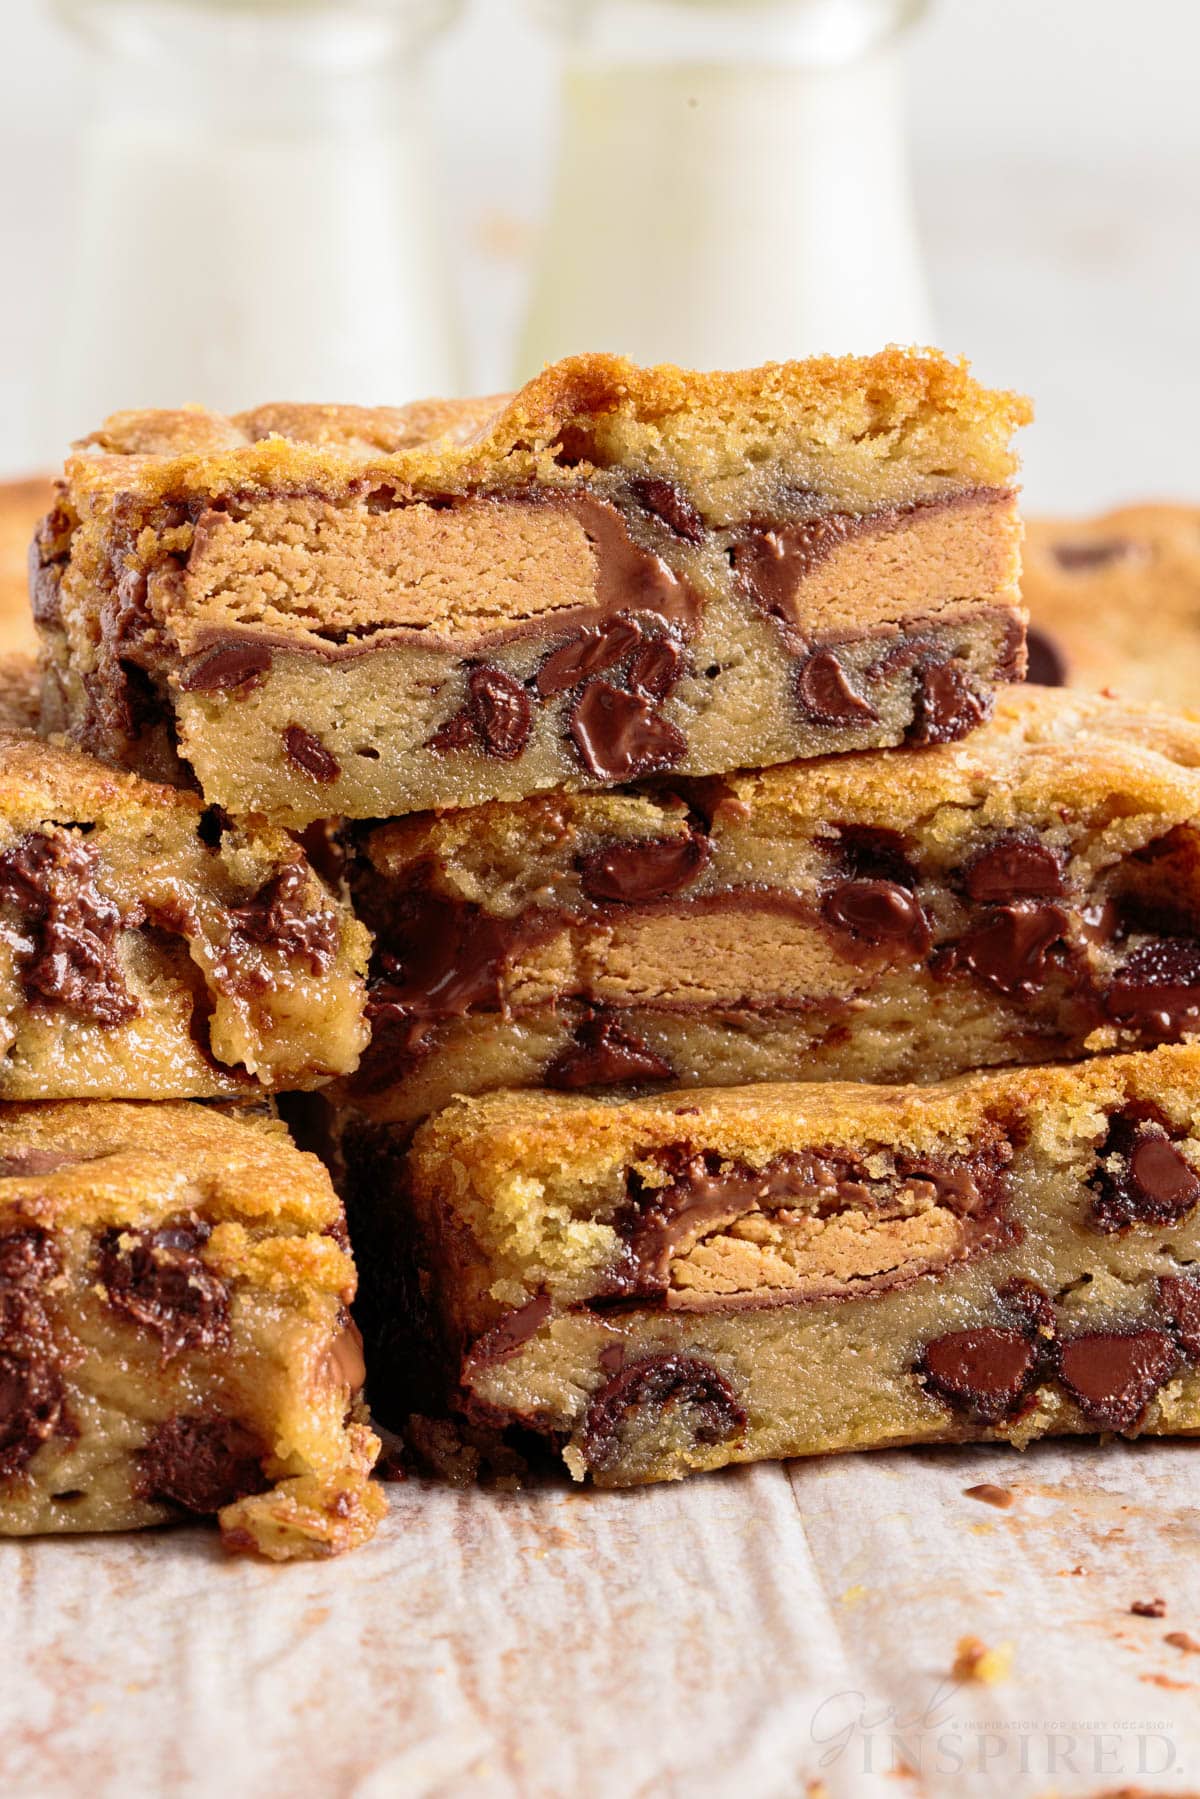 Peanut butter cup cookie bars stacked on each other.